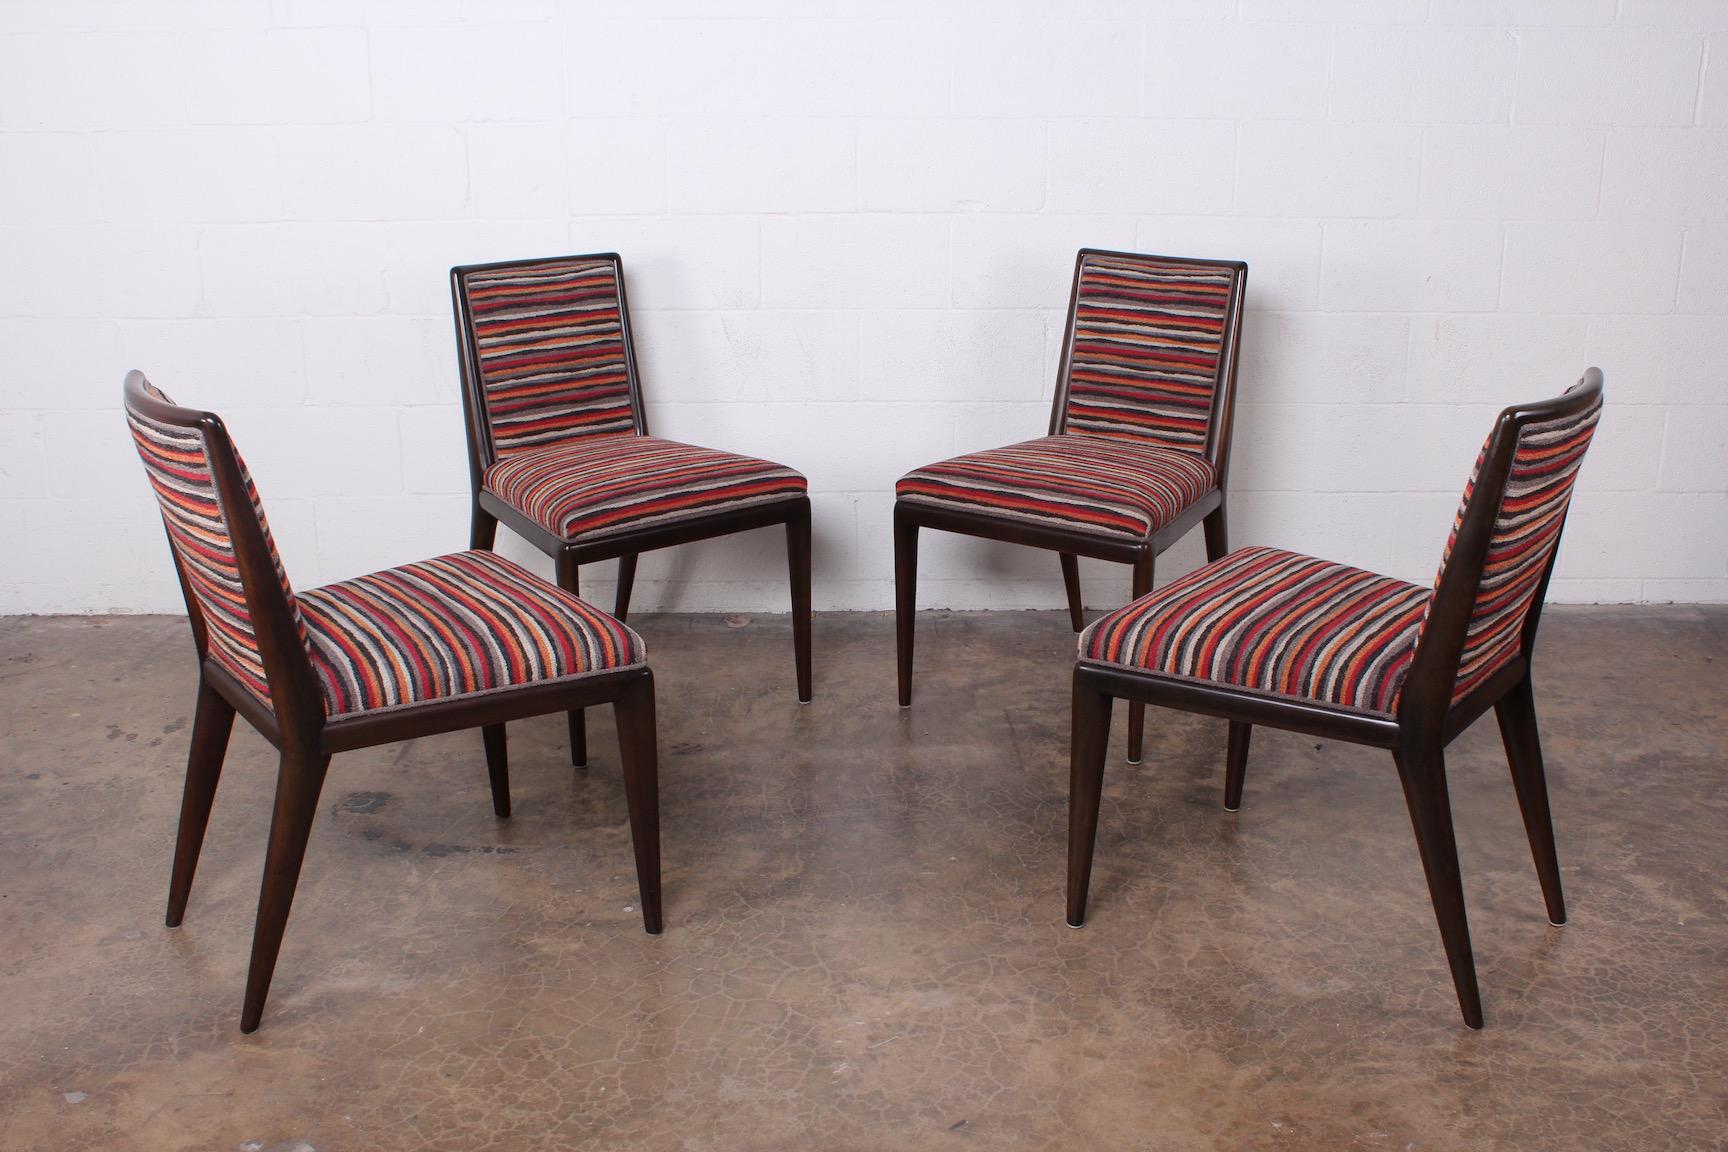 A set of four dining chairs designed by T.H. Robsjohn-Gibbings for Widdicomb.